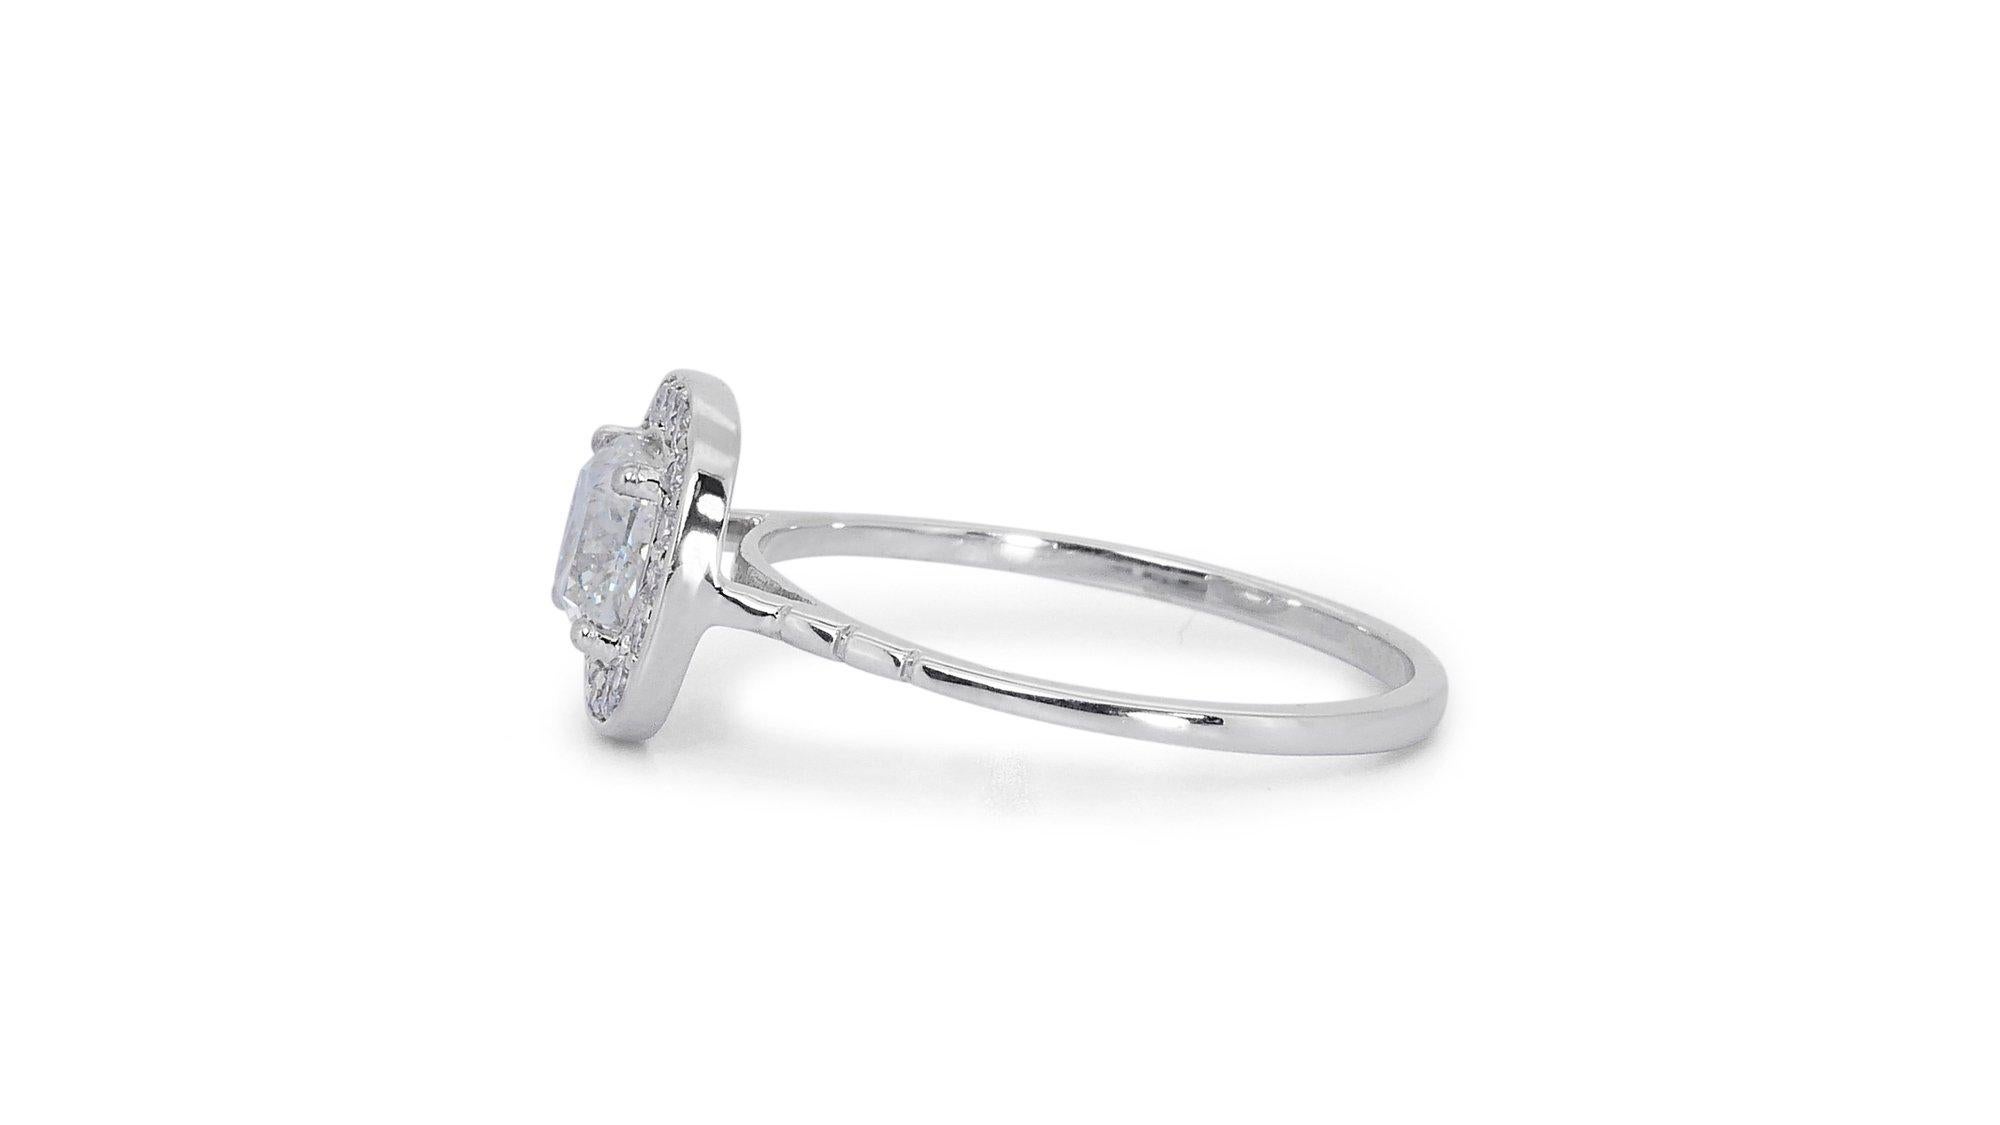 Elegant 1.17ct Diamonds Halo Ring in 18k White Gold - GIA Certified In New Condition For Sale In רמת גן, IL